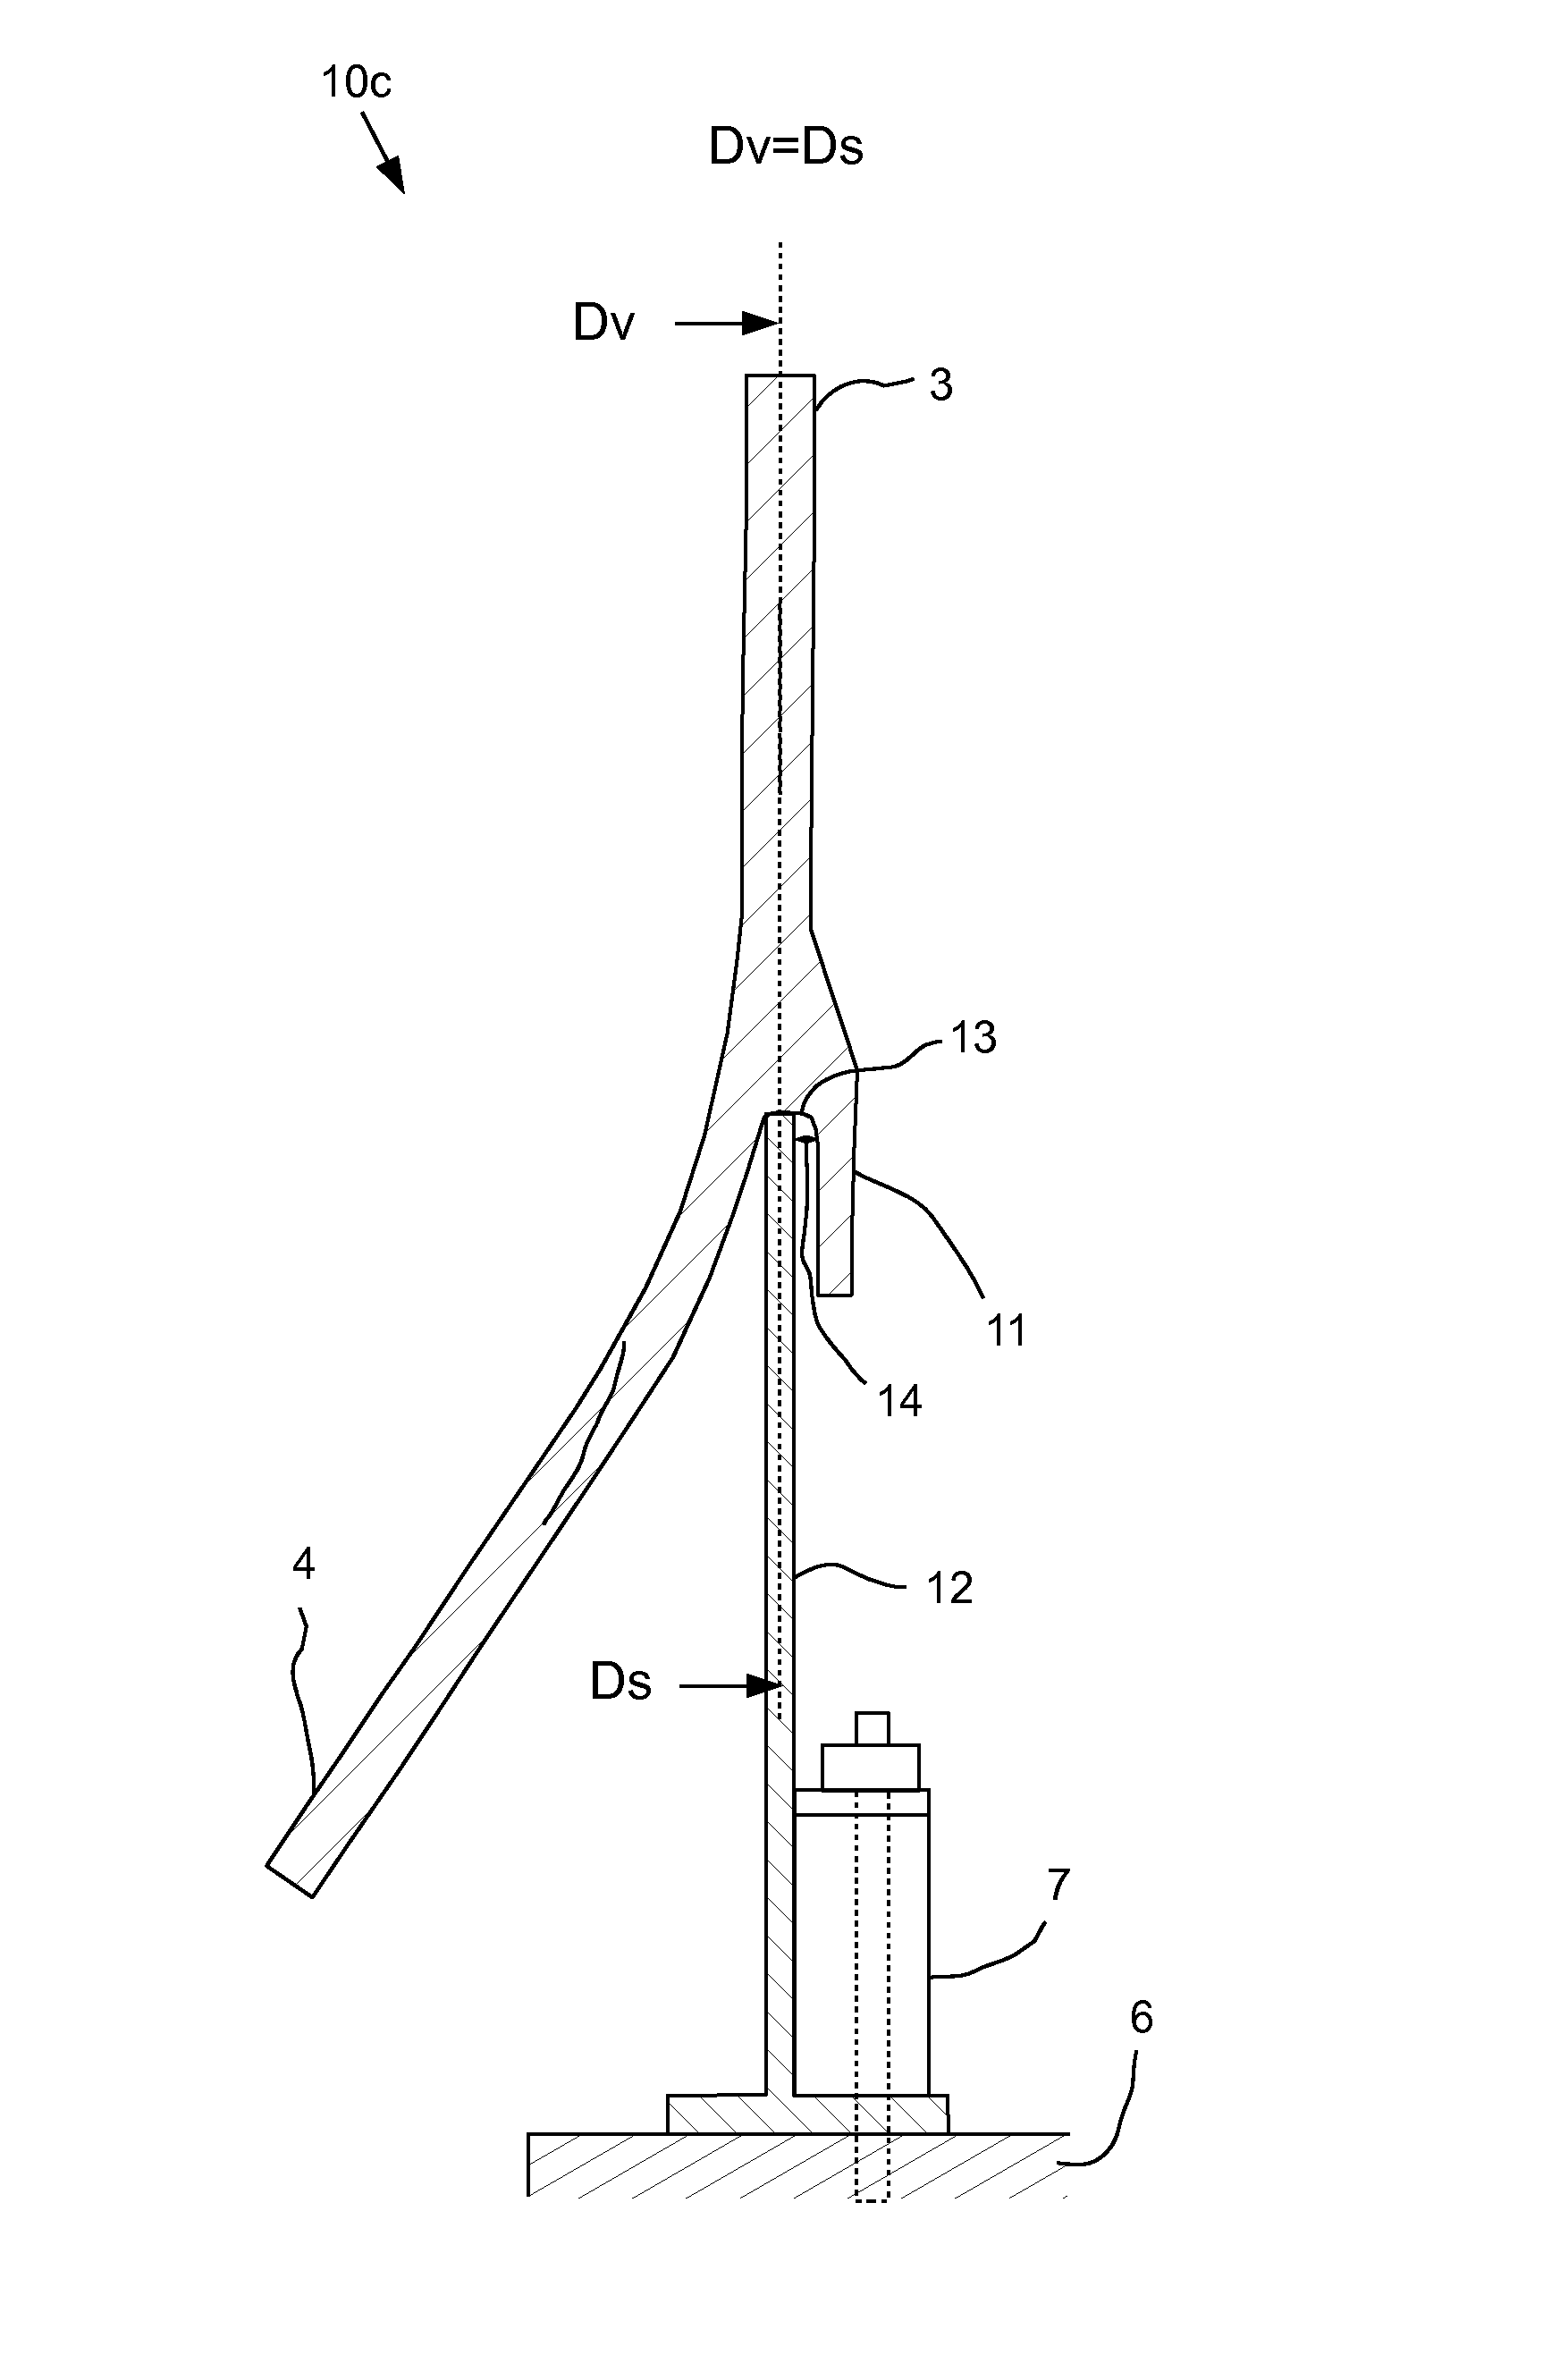 Pressure vessel skirt for accommodating thermal cycling